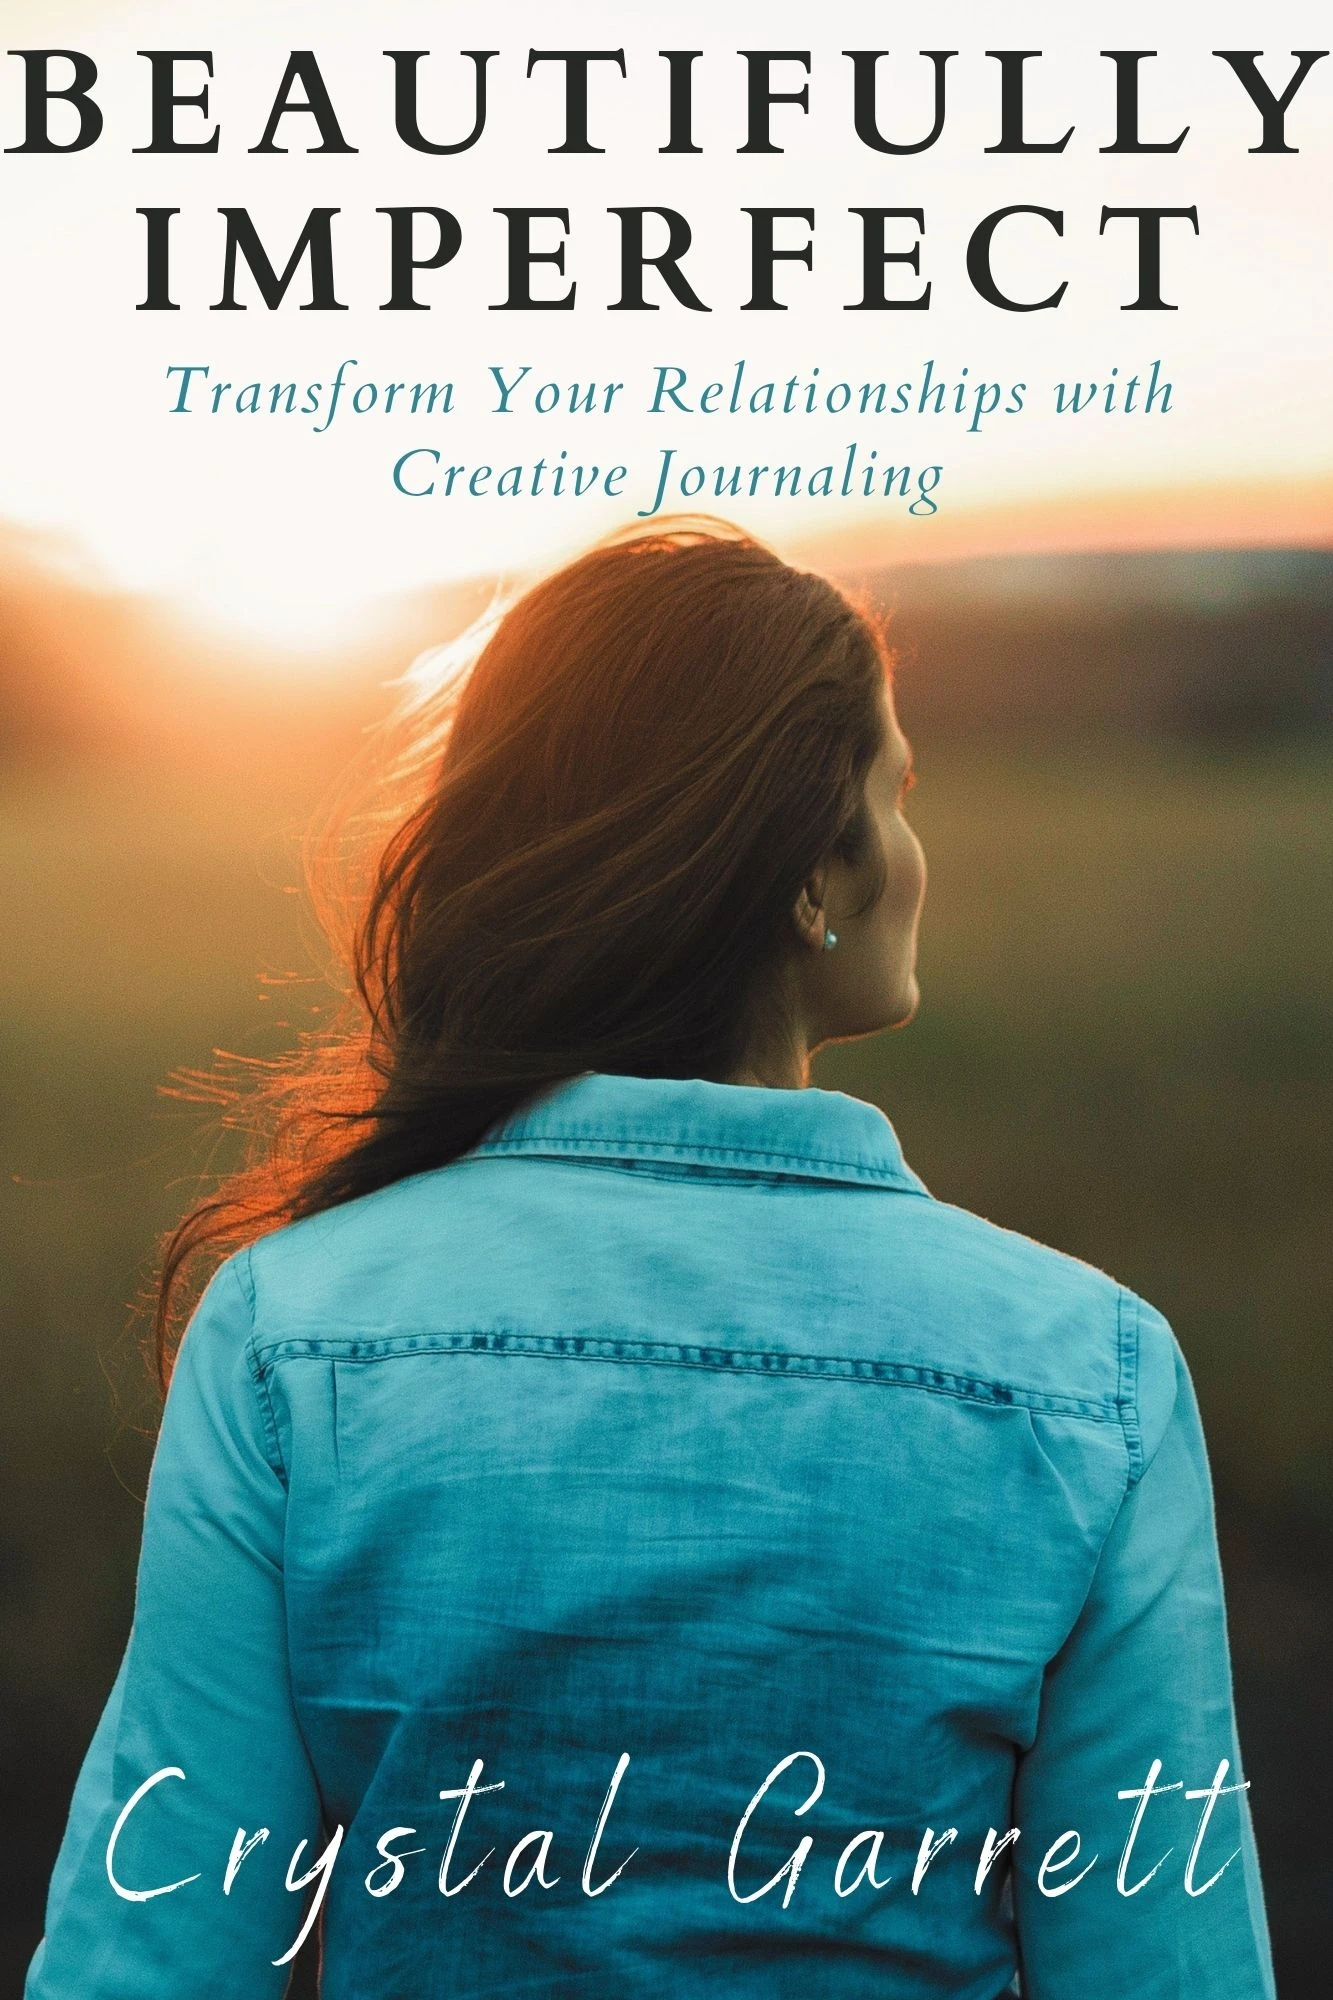 Beautifully Imperfect: Transform Your Relationships with Creative Journaling